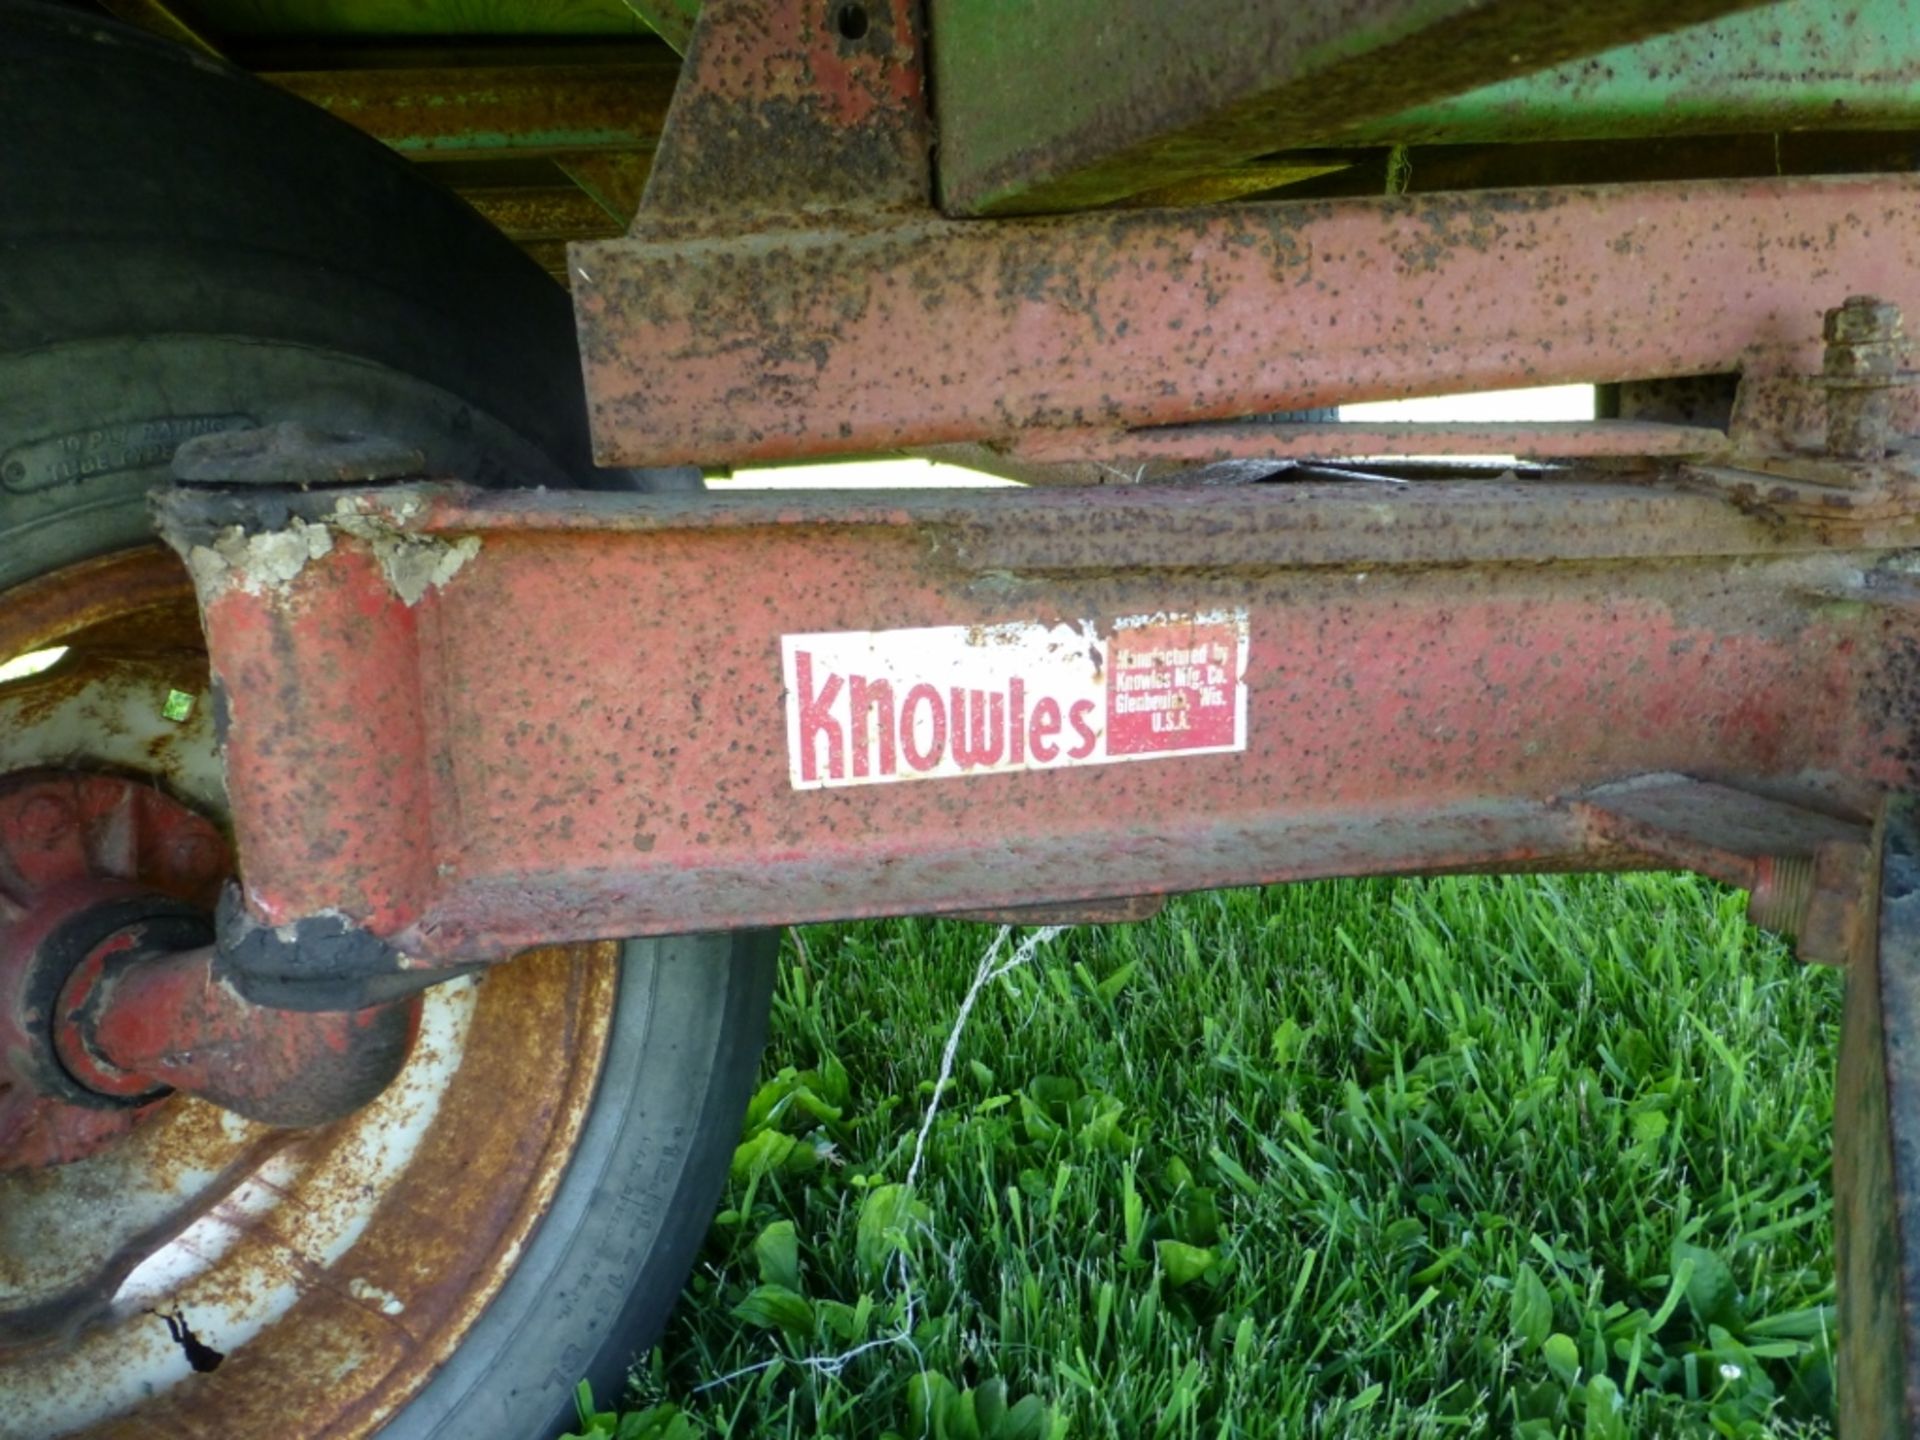 Older style forage box with Knowles running gear - Image 11 of 11